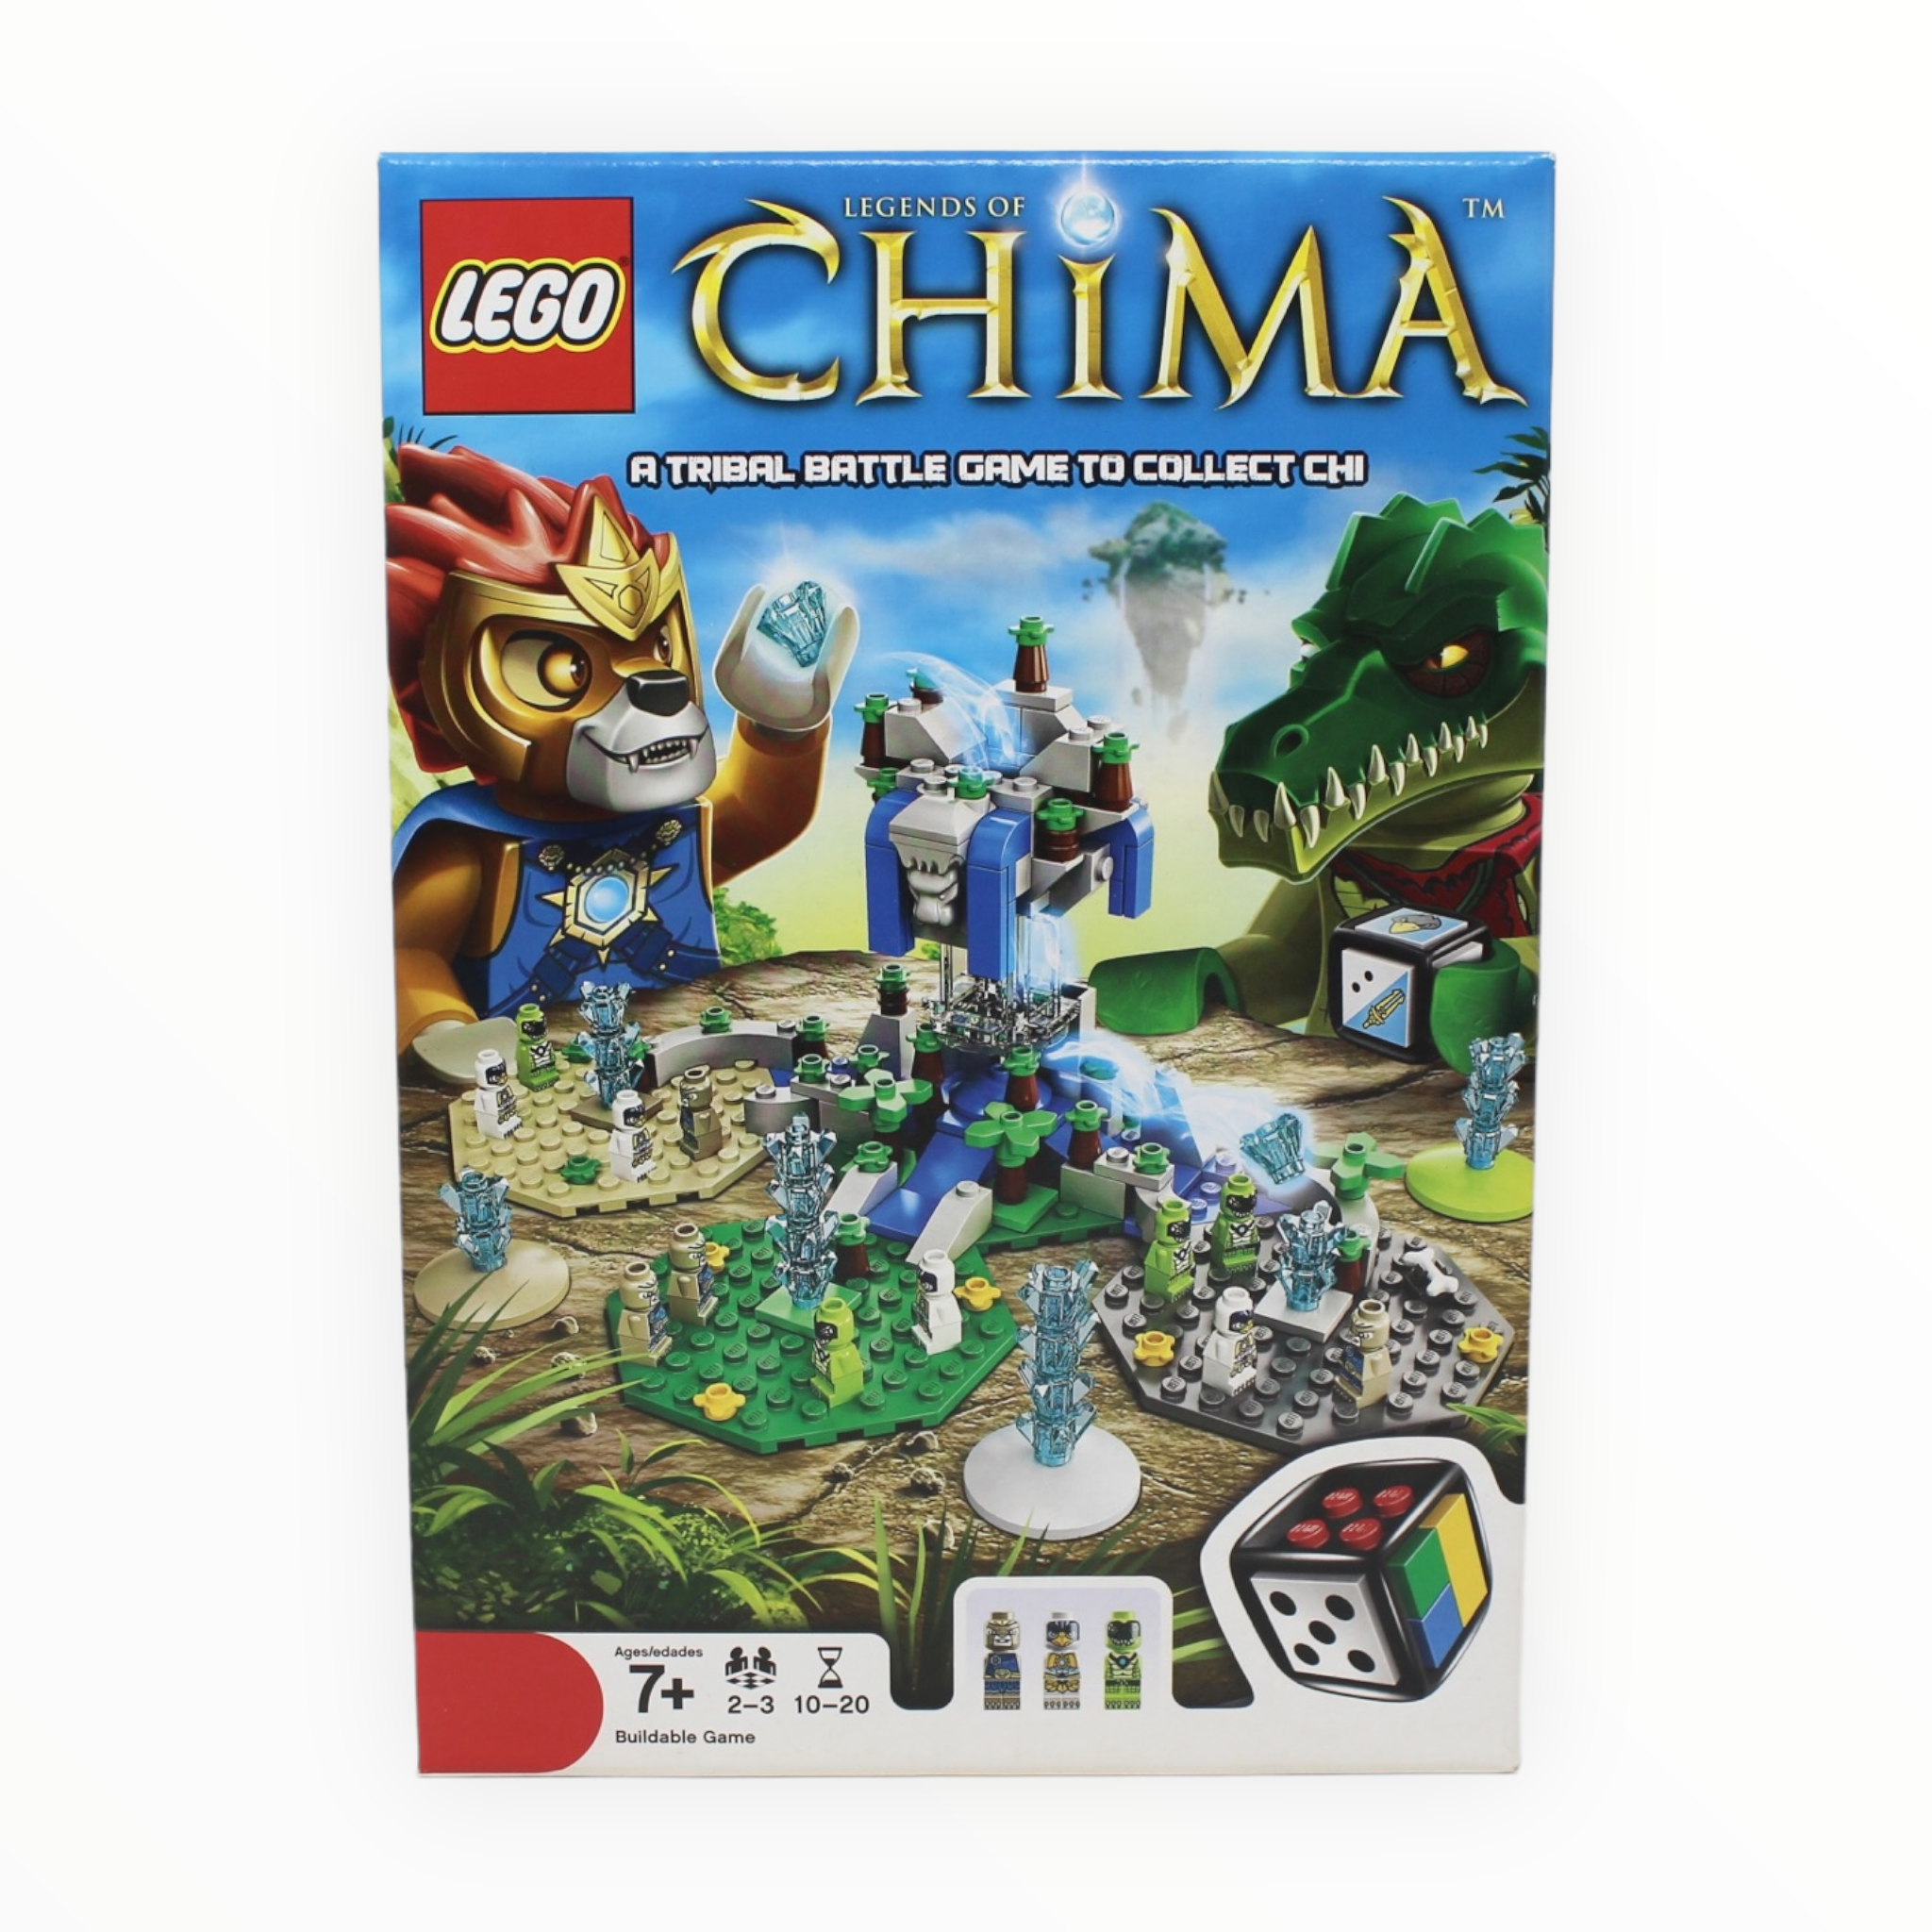 Certified Used Set 50006 LEGO Legends of Chima